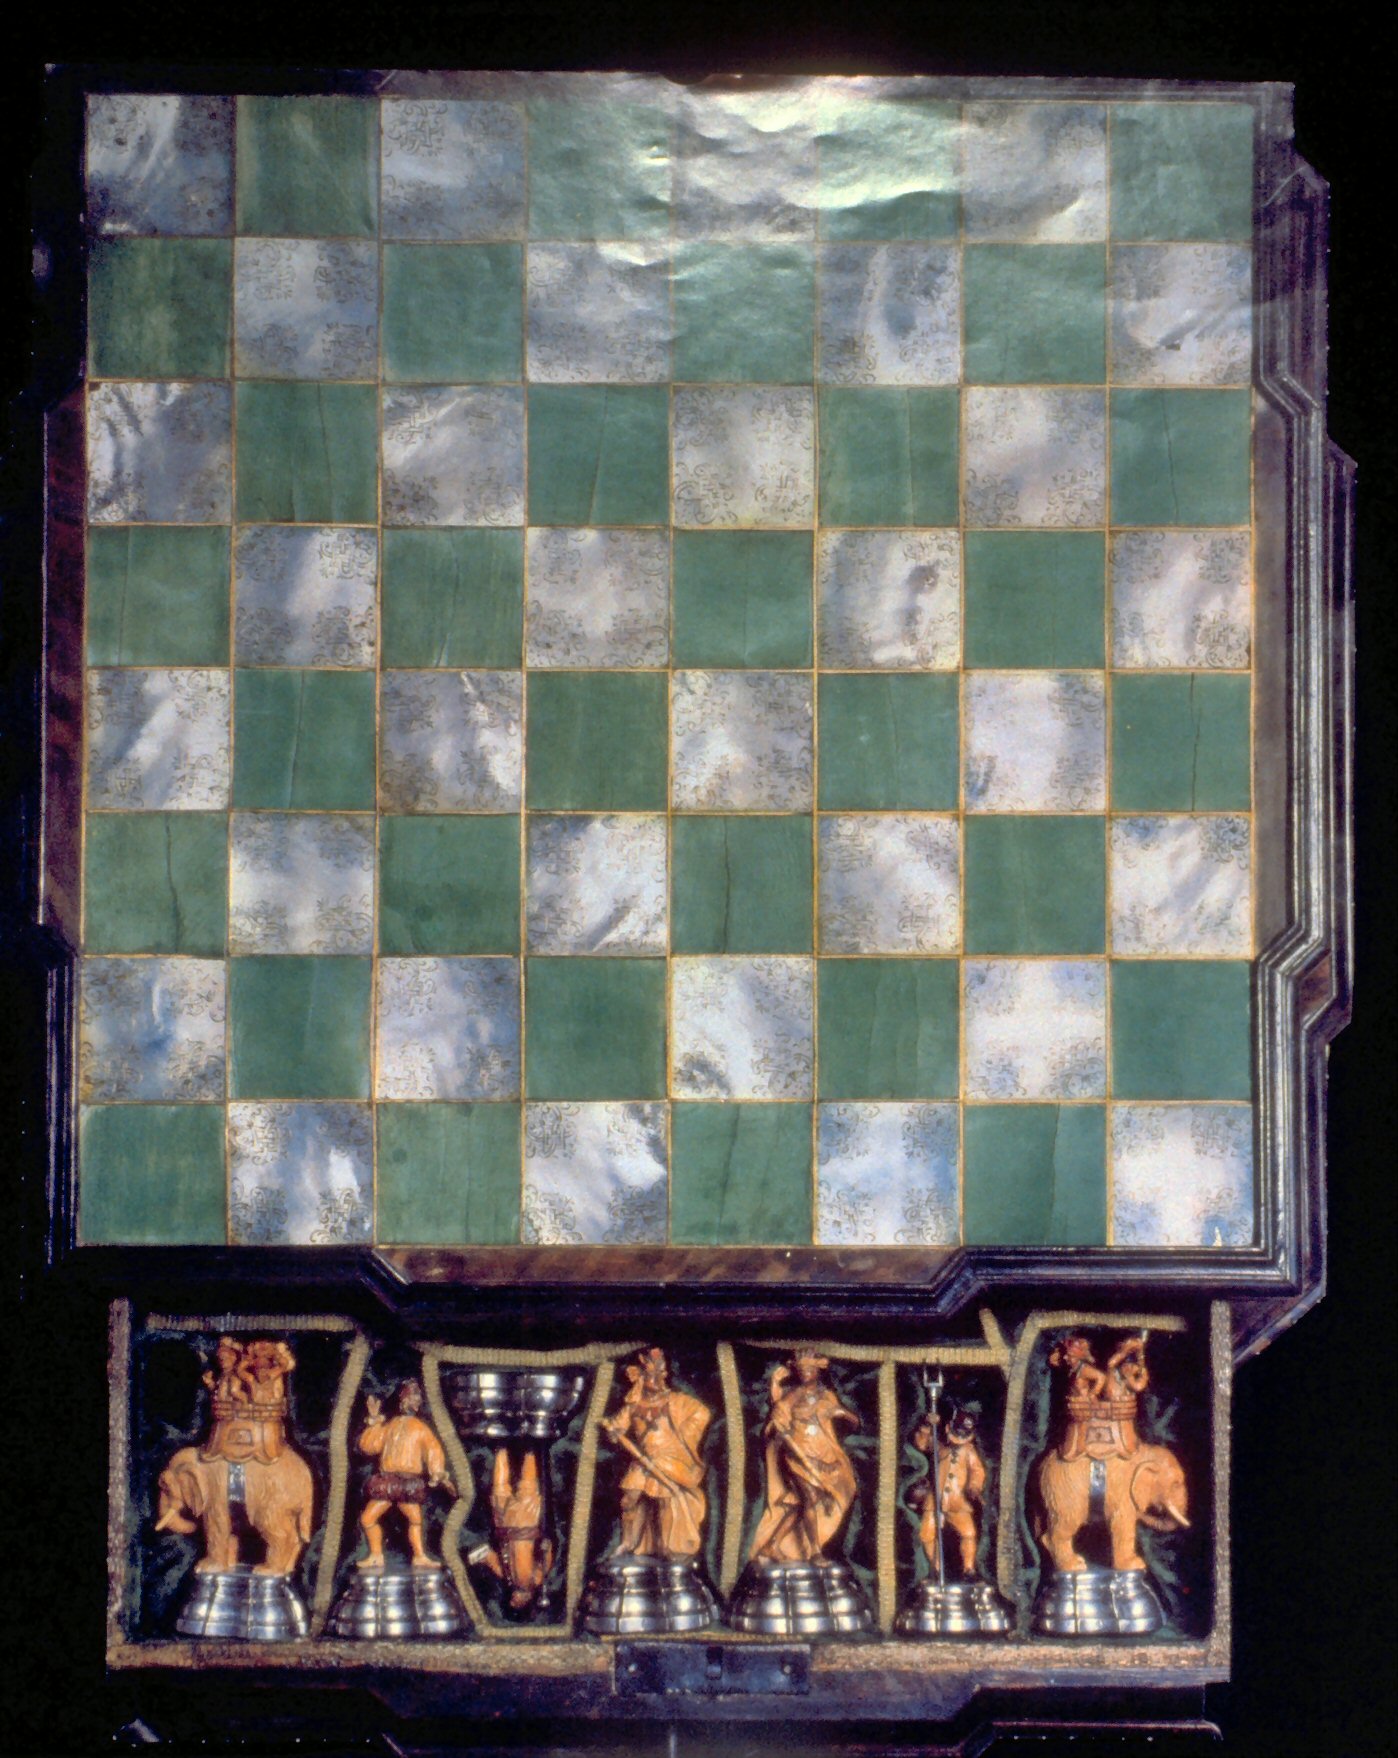 German board with pieces